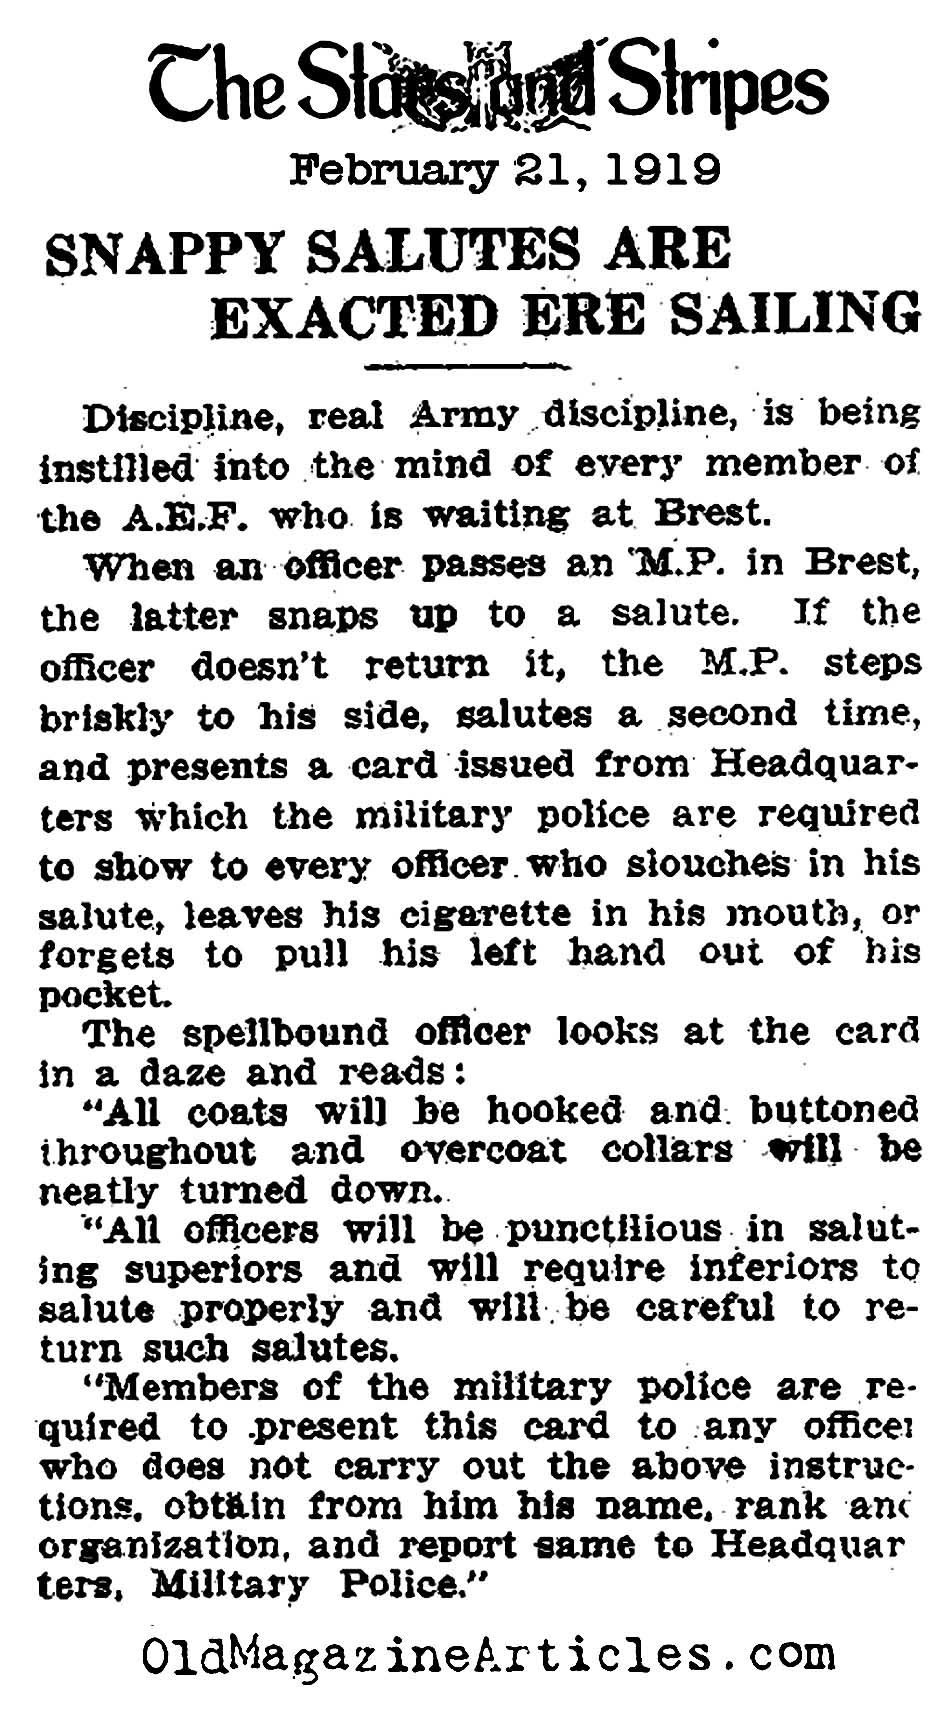 Evidence of a Growing Discipline Problem Within the A.E.F. (The Stars and Stripes. 1919)